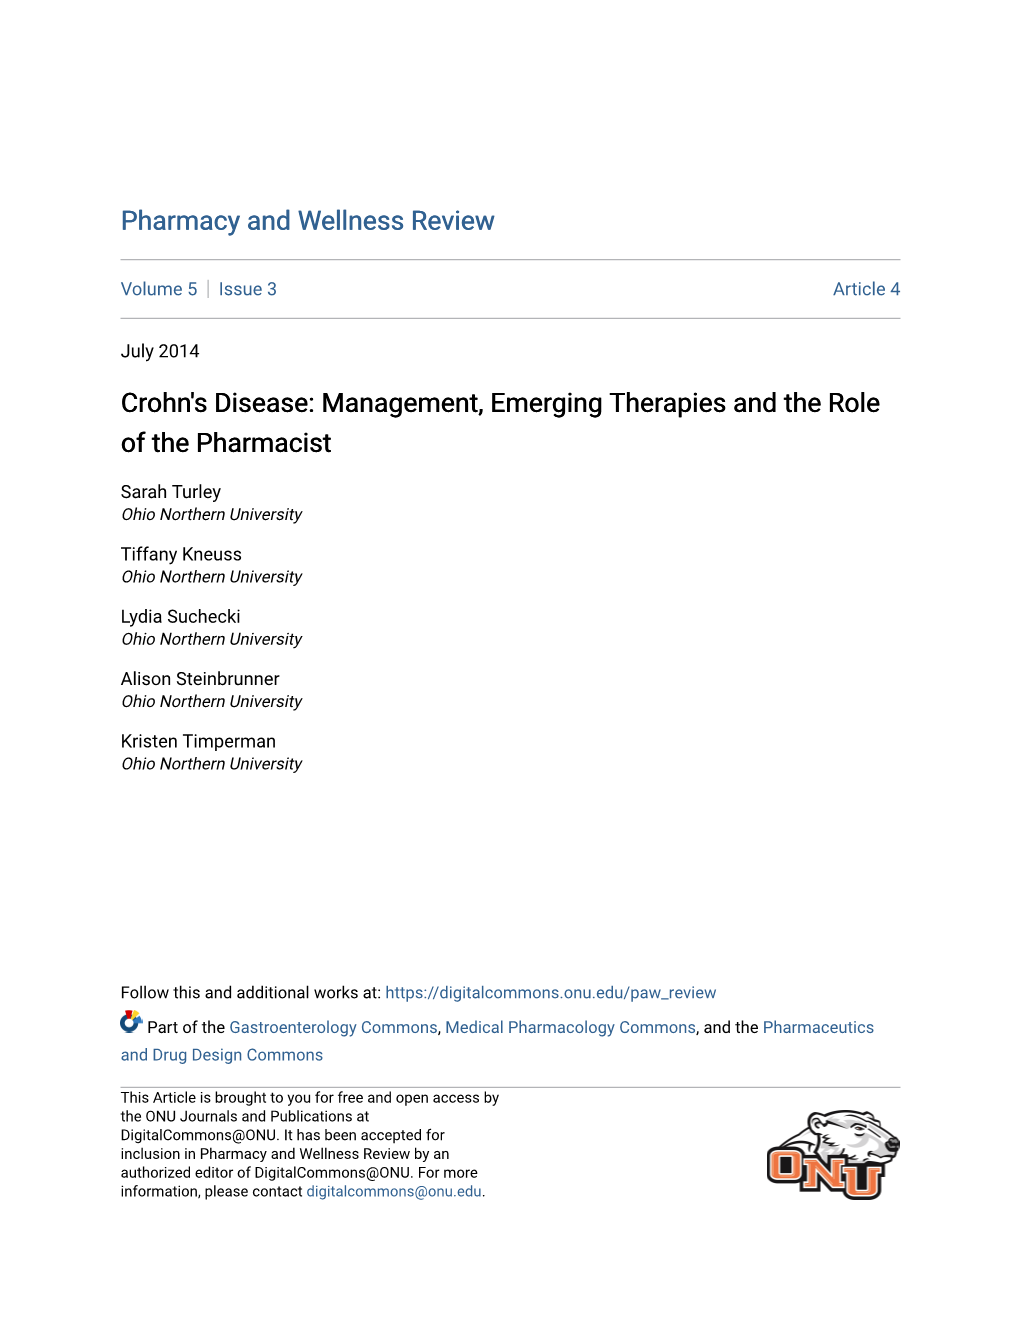 Crohn's Disease: Management, Emerging Therapies and the Role of the Pharmacist